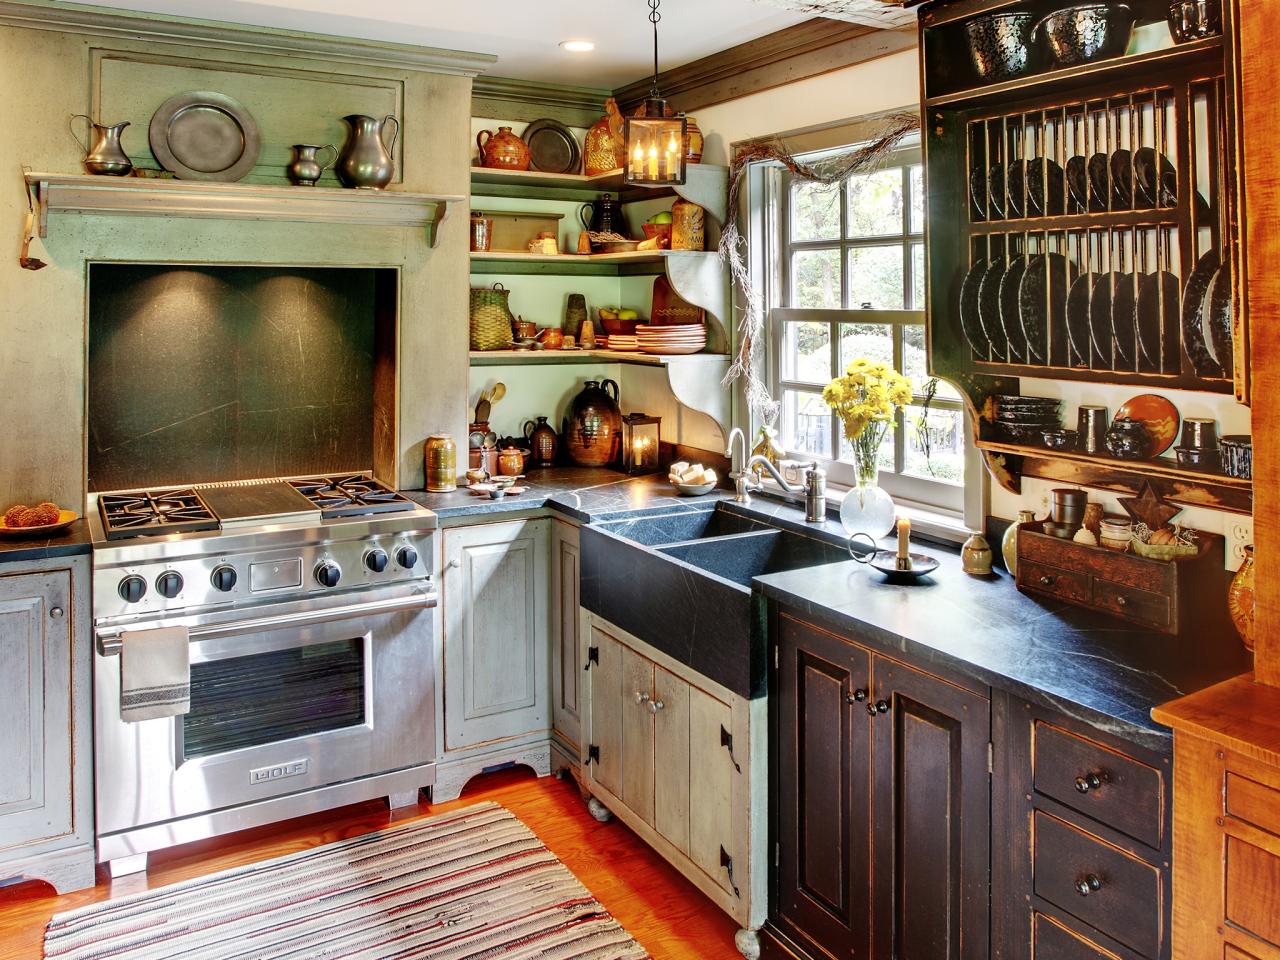 Recycled Kitchen Cabinets Pictures, Options, Tips & Ideas   HGTV